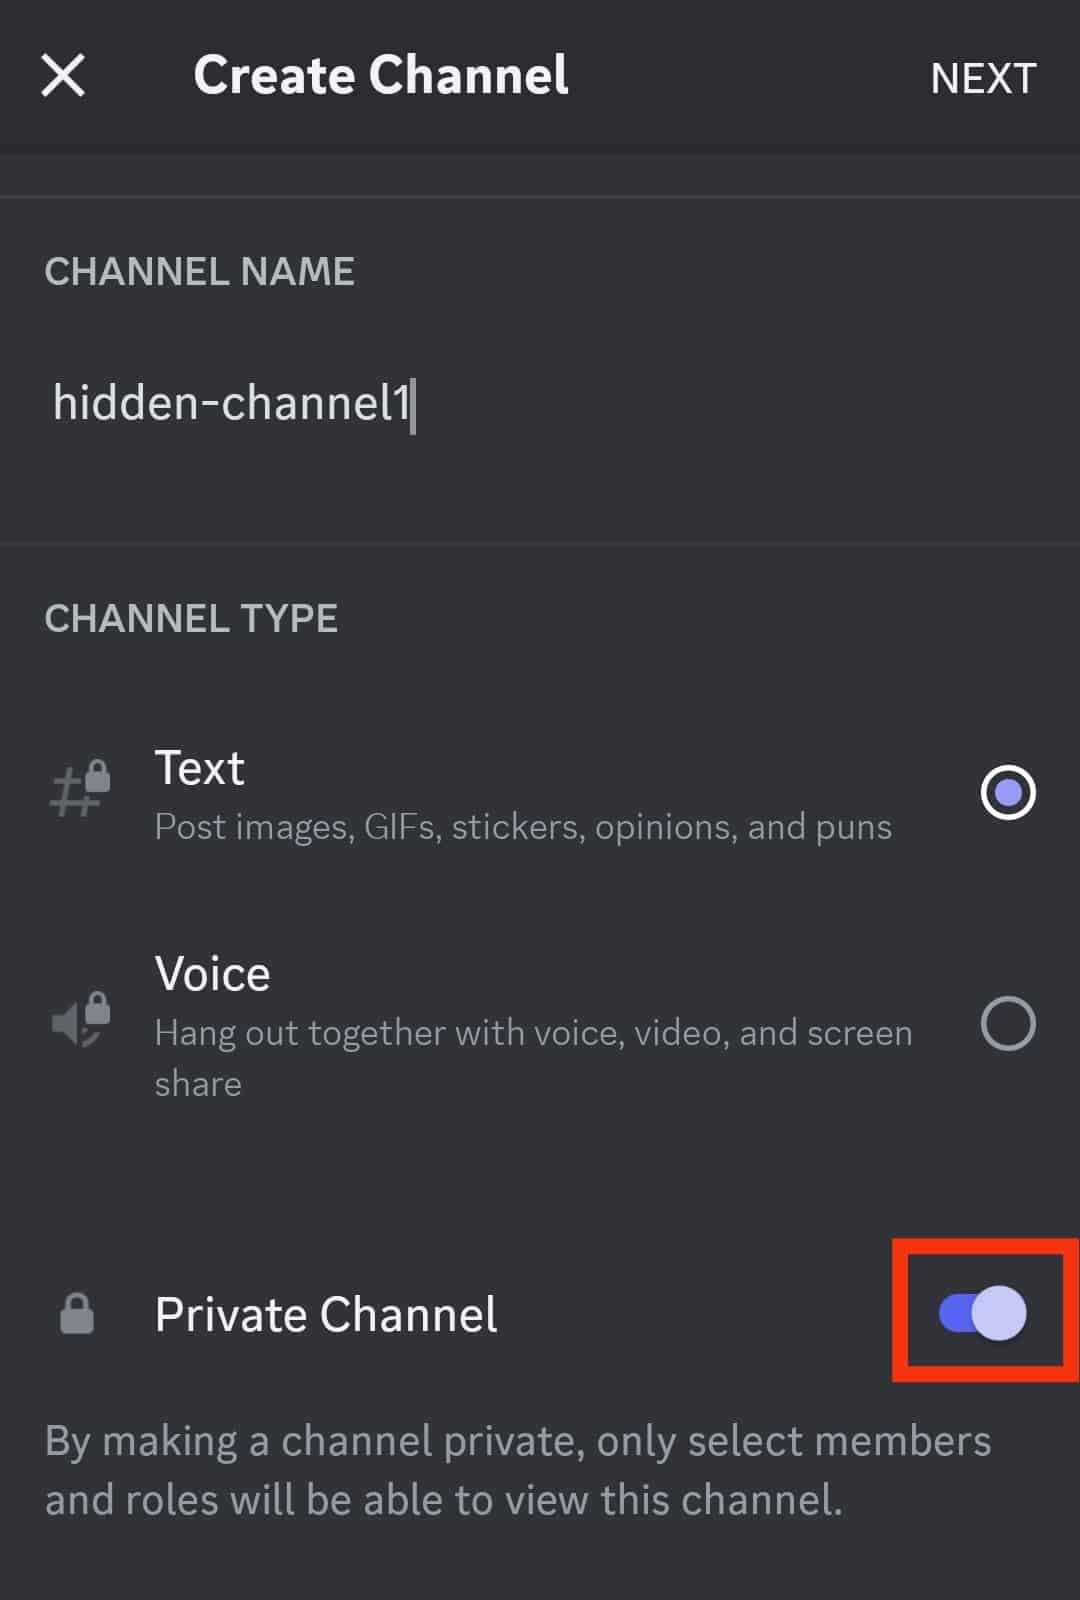 Turn On The Toggle Next To The&Nbsp;Private Channel&Nbsp;Option